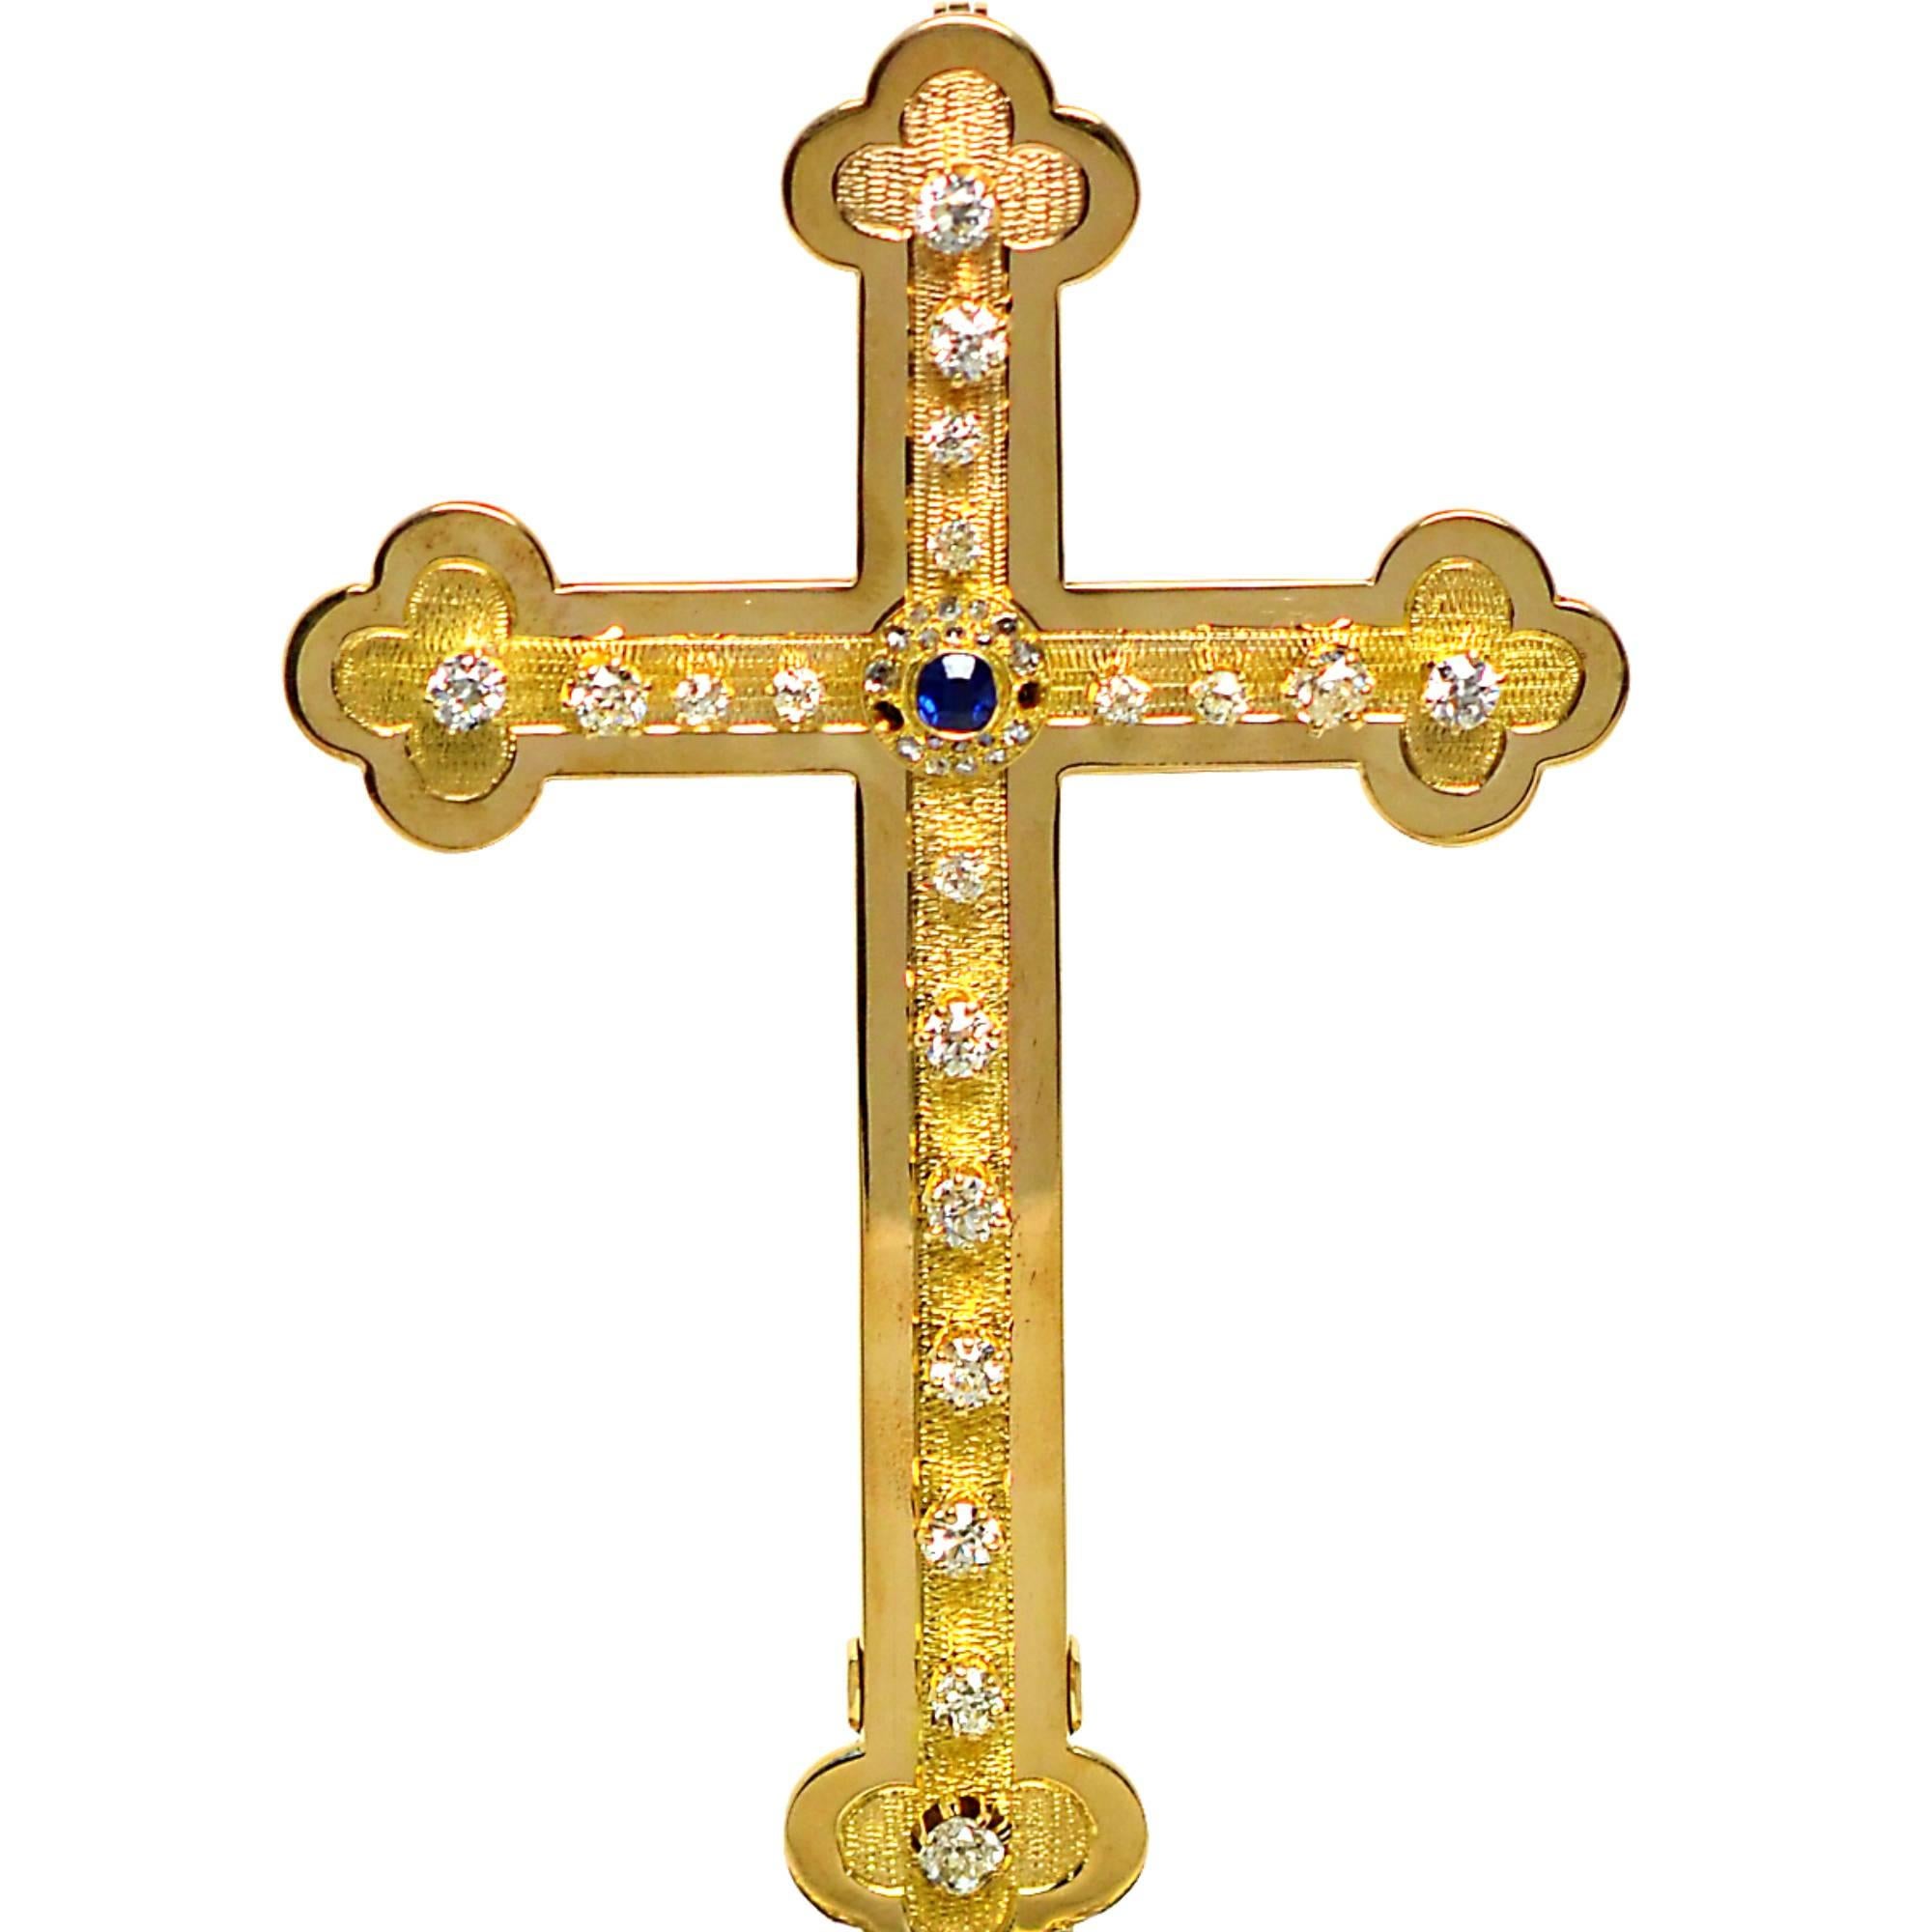 Unique 18k yellow gold cross featuring approximately 13.50cts of European, baguette and round brilliant cut diamonds fastened up top a 5900ct emerald base. The cross is removable and includes a bale to wear as a pendant. The cross measures 5 inches